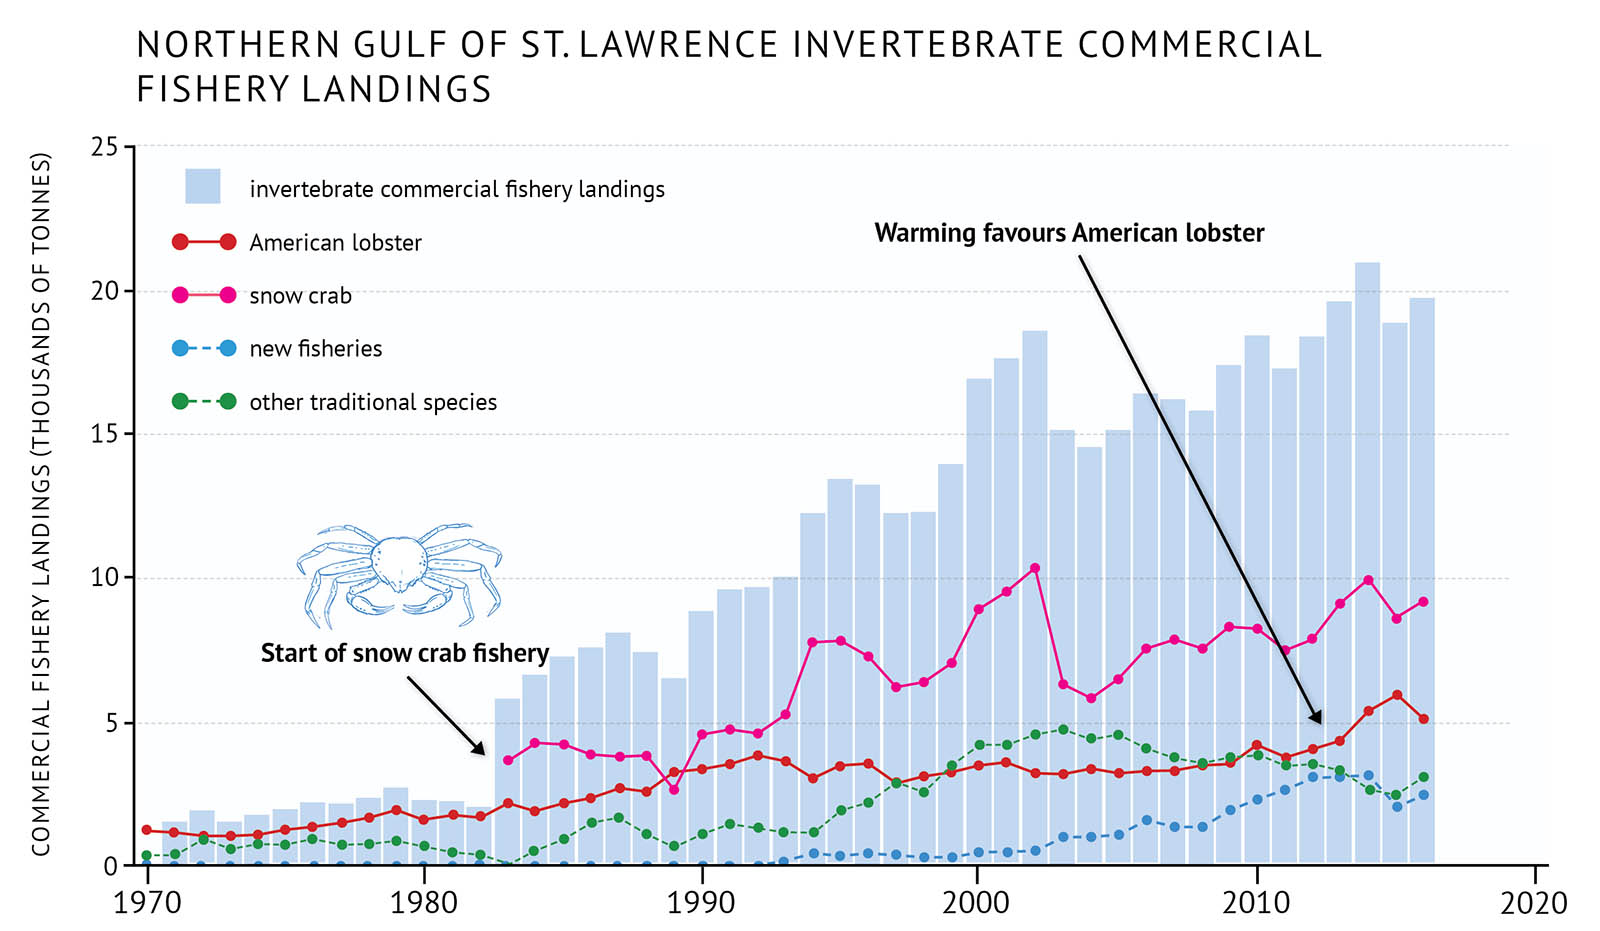 Figure 25: Commercial fishery landings for benthic invertebrates along with individual species in the northern Gulf of St. Lawrence. New fisheries include green sea urchin, sea cucumber and Arctic surf clam. Other traditional species are Atlantic rock crab, Hyas crab, giant scallop, whelk, common softshell clam, Atlantic jacknife clam and Atlantic surfclam. A bar and line graph illustrates the commercial fishery landings for benthic invertebrates as well as individual species in the northern Gulf of St. Lawrence. Text above the graph says “Northern Gulf of St. Lawrence Invertebrate Commercial Fishery Landings”.The vertical axis on the left shows the survey biomass in units of thousands of tonnes from 0 to 25 in increments of 5. The bottom horizontal axis shows the years between 1970 and 2020 in 10 year increments. The commercial fishery landings for benthic invertebrates is represented by light blue vertical bars. The data extends from 1970 to 2016. The commercial landings are less than 5 thousand tonnes in the 1970s and early 1980s. In 1983 it jumps up above 5 thousand tonnes and continually increases with some fluctuations until it is near 20 thousand tonnes by the mid-2010s. The commercial fishery landings of individual species are represented by coloured lines on the same graph. A legend appears on the left. A red data line shows the commercial fishery landings of American lobster. A pink data line shows the commercial fishery landings of snow crab. A light blue dashed data line shows the commercial fishery landings for new fisheries. A green dashed data line shows the commercial fishery landings for other traditional species. The trend for American lobster landings starts below 5 thousand tonnes and gradually increases over the period of the graph ending near 5 thousand tonnes by the mid-2010s. The landings for other traditional species and new fisheries are lower than American lobster. The other traditional species landings begin to gradually increase in the 1980s and 1990s until they near 5 thousand tonnes and then decrease to near 3 thousand tonnes in the mid-2010s. The new fisheries landings begin to increase in the 1990s and are near 2 to 3 thousand tonnes by the mid-2010s. The snow crab landings begin in 1983 below 5 thousand tonnes. They increase in the 1990s and near 10 thousand tonnes by the early 2000s. They drop and then gradually increase in the mid-late 2000s and 2010s again nearing 10 thousand tonnes. A small, light blue outline drawing of a snow crab is placed above the vertical bars to the left-hand side of the graph. Below the drawing there is text which states “Start of snow crab fishery”. An arrow points from the text to the start of the pink data line in 1983. Another line of text above the vertical bars on the right-hand side of the graph says “Warming favours American lobster”. An arrow points from the text to the red data line in the 2010s.